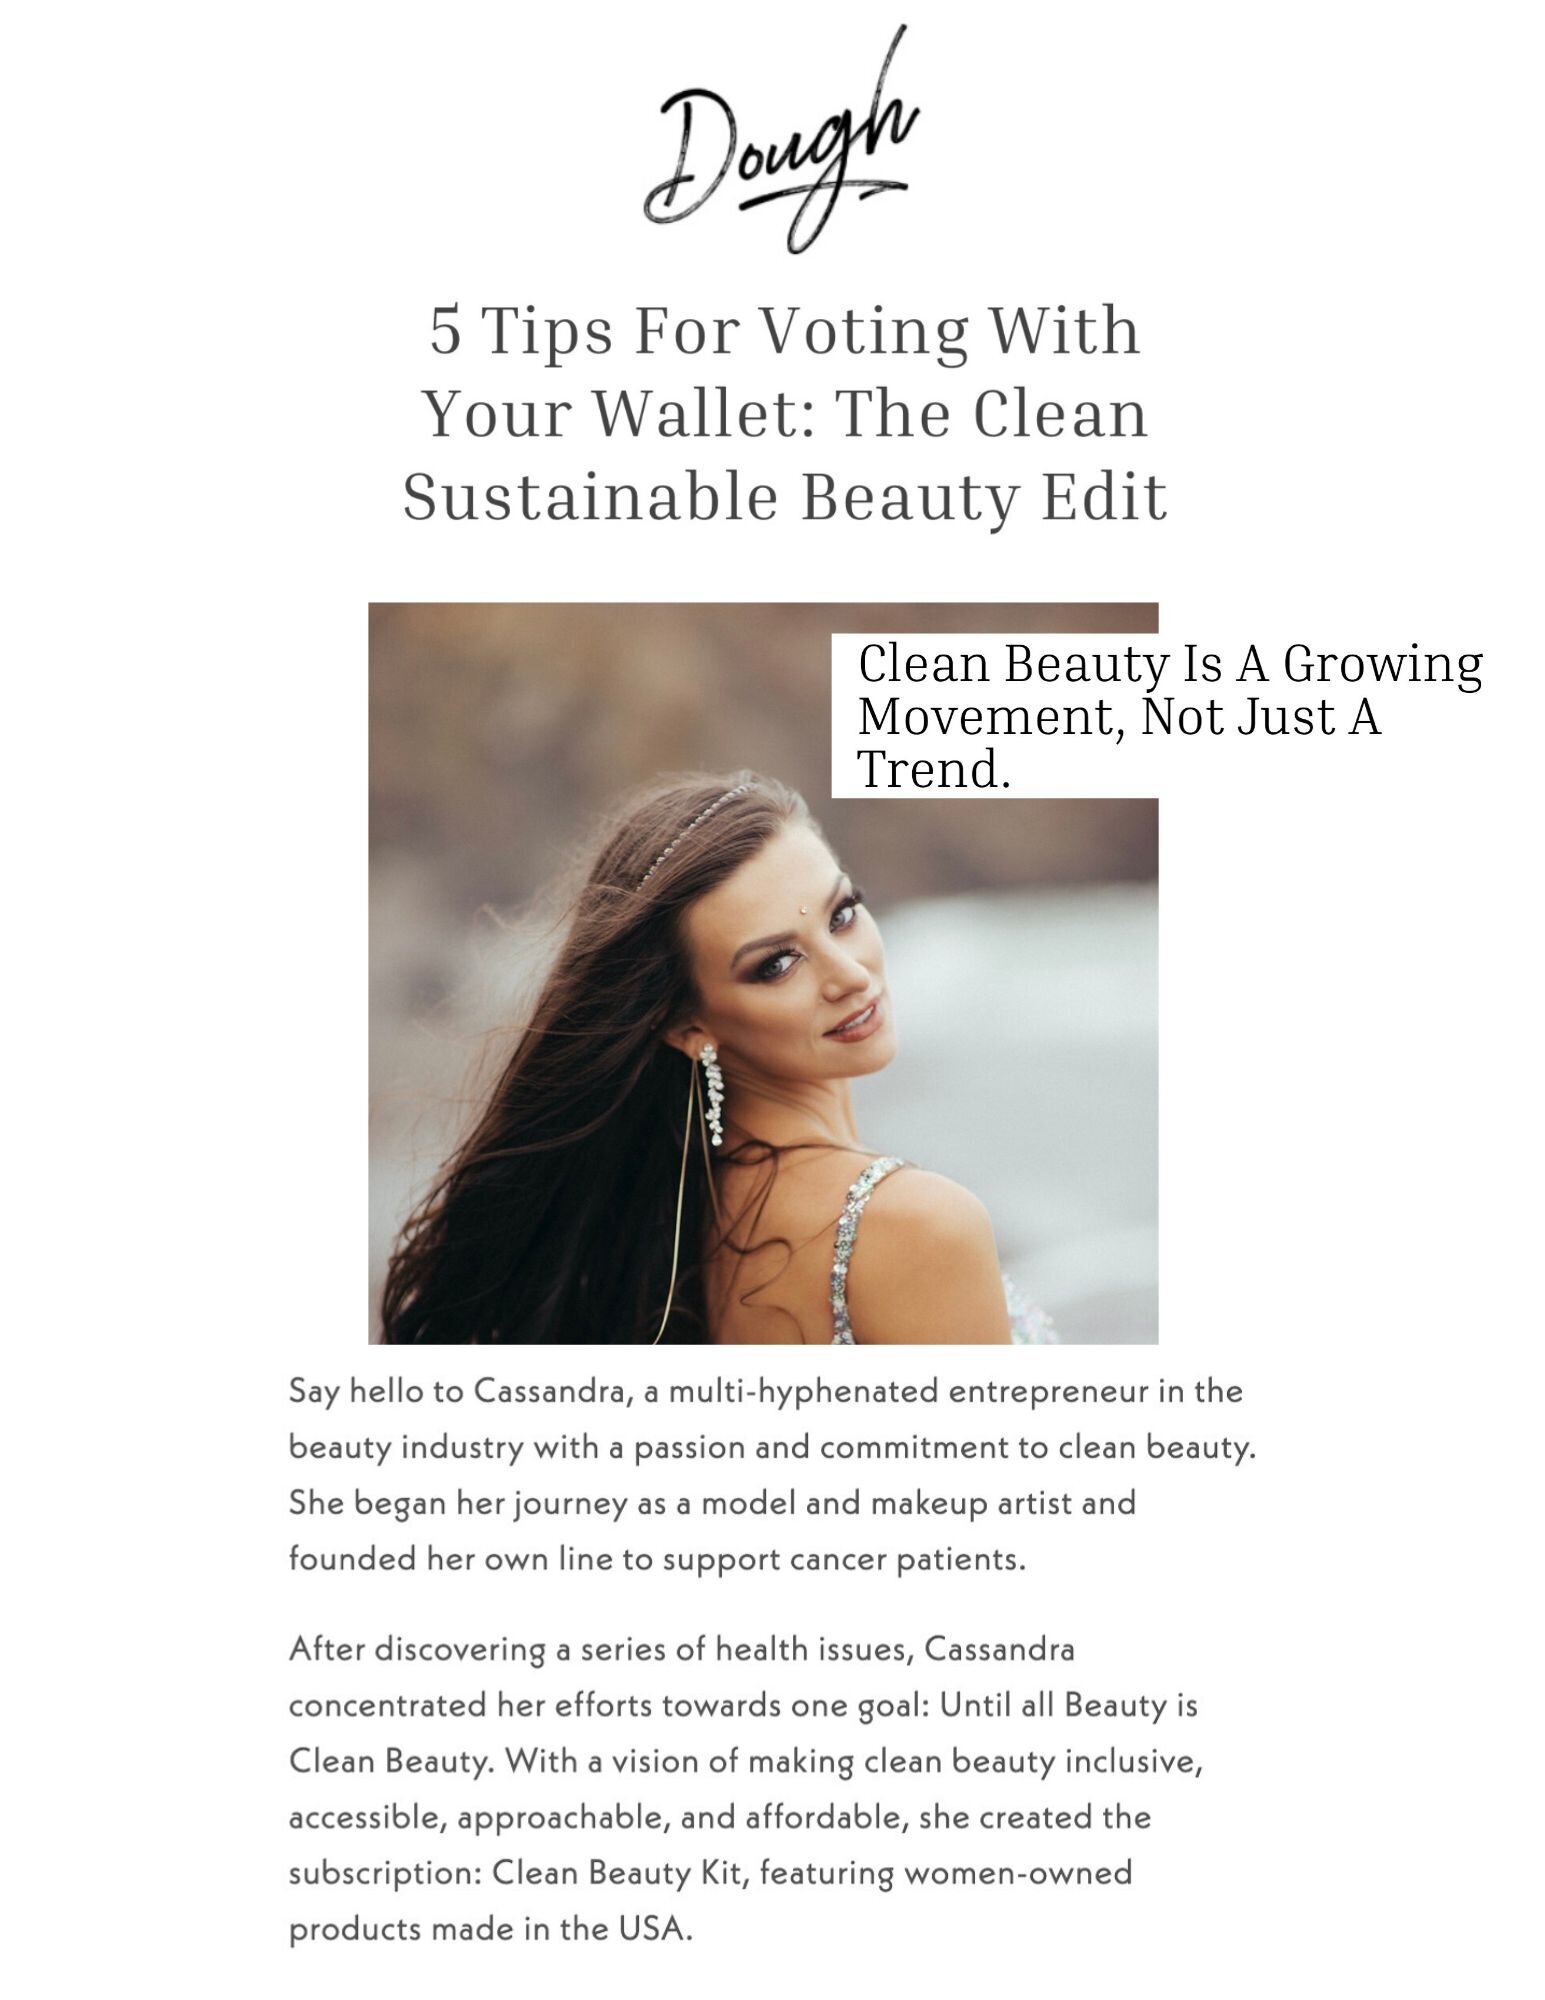 DOUGH article featuring Cassandra McClure on sustainable beauty